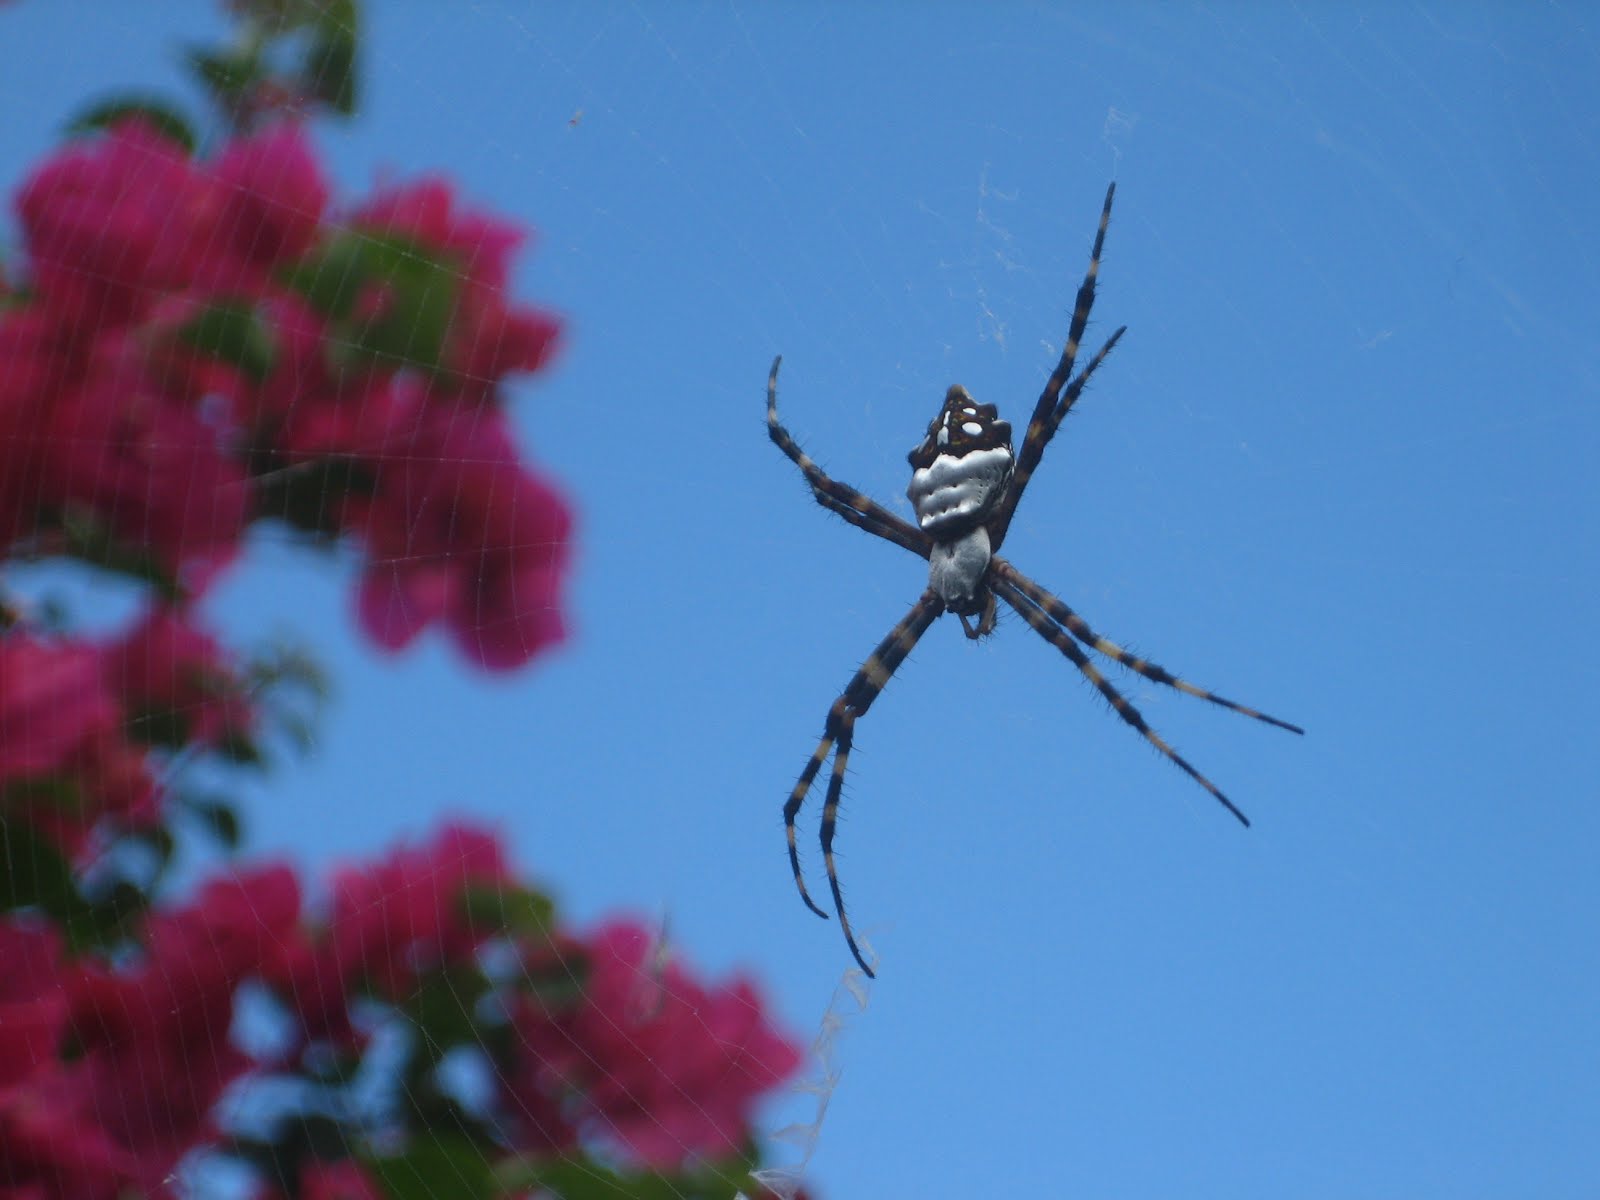 SPIDER BY THE BOUGANVILLEA SOUTH SIDE